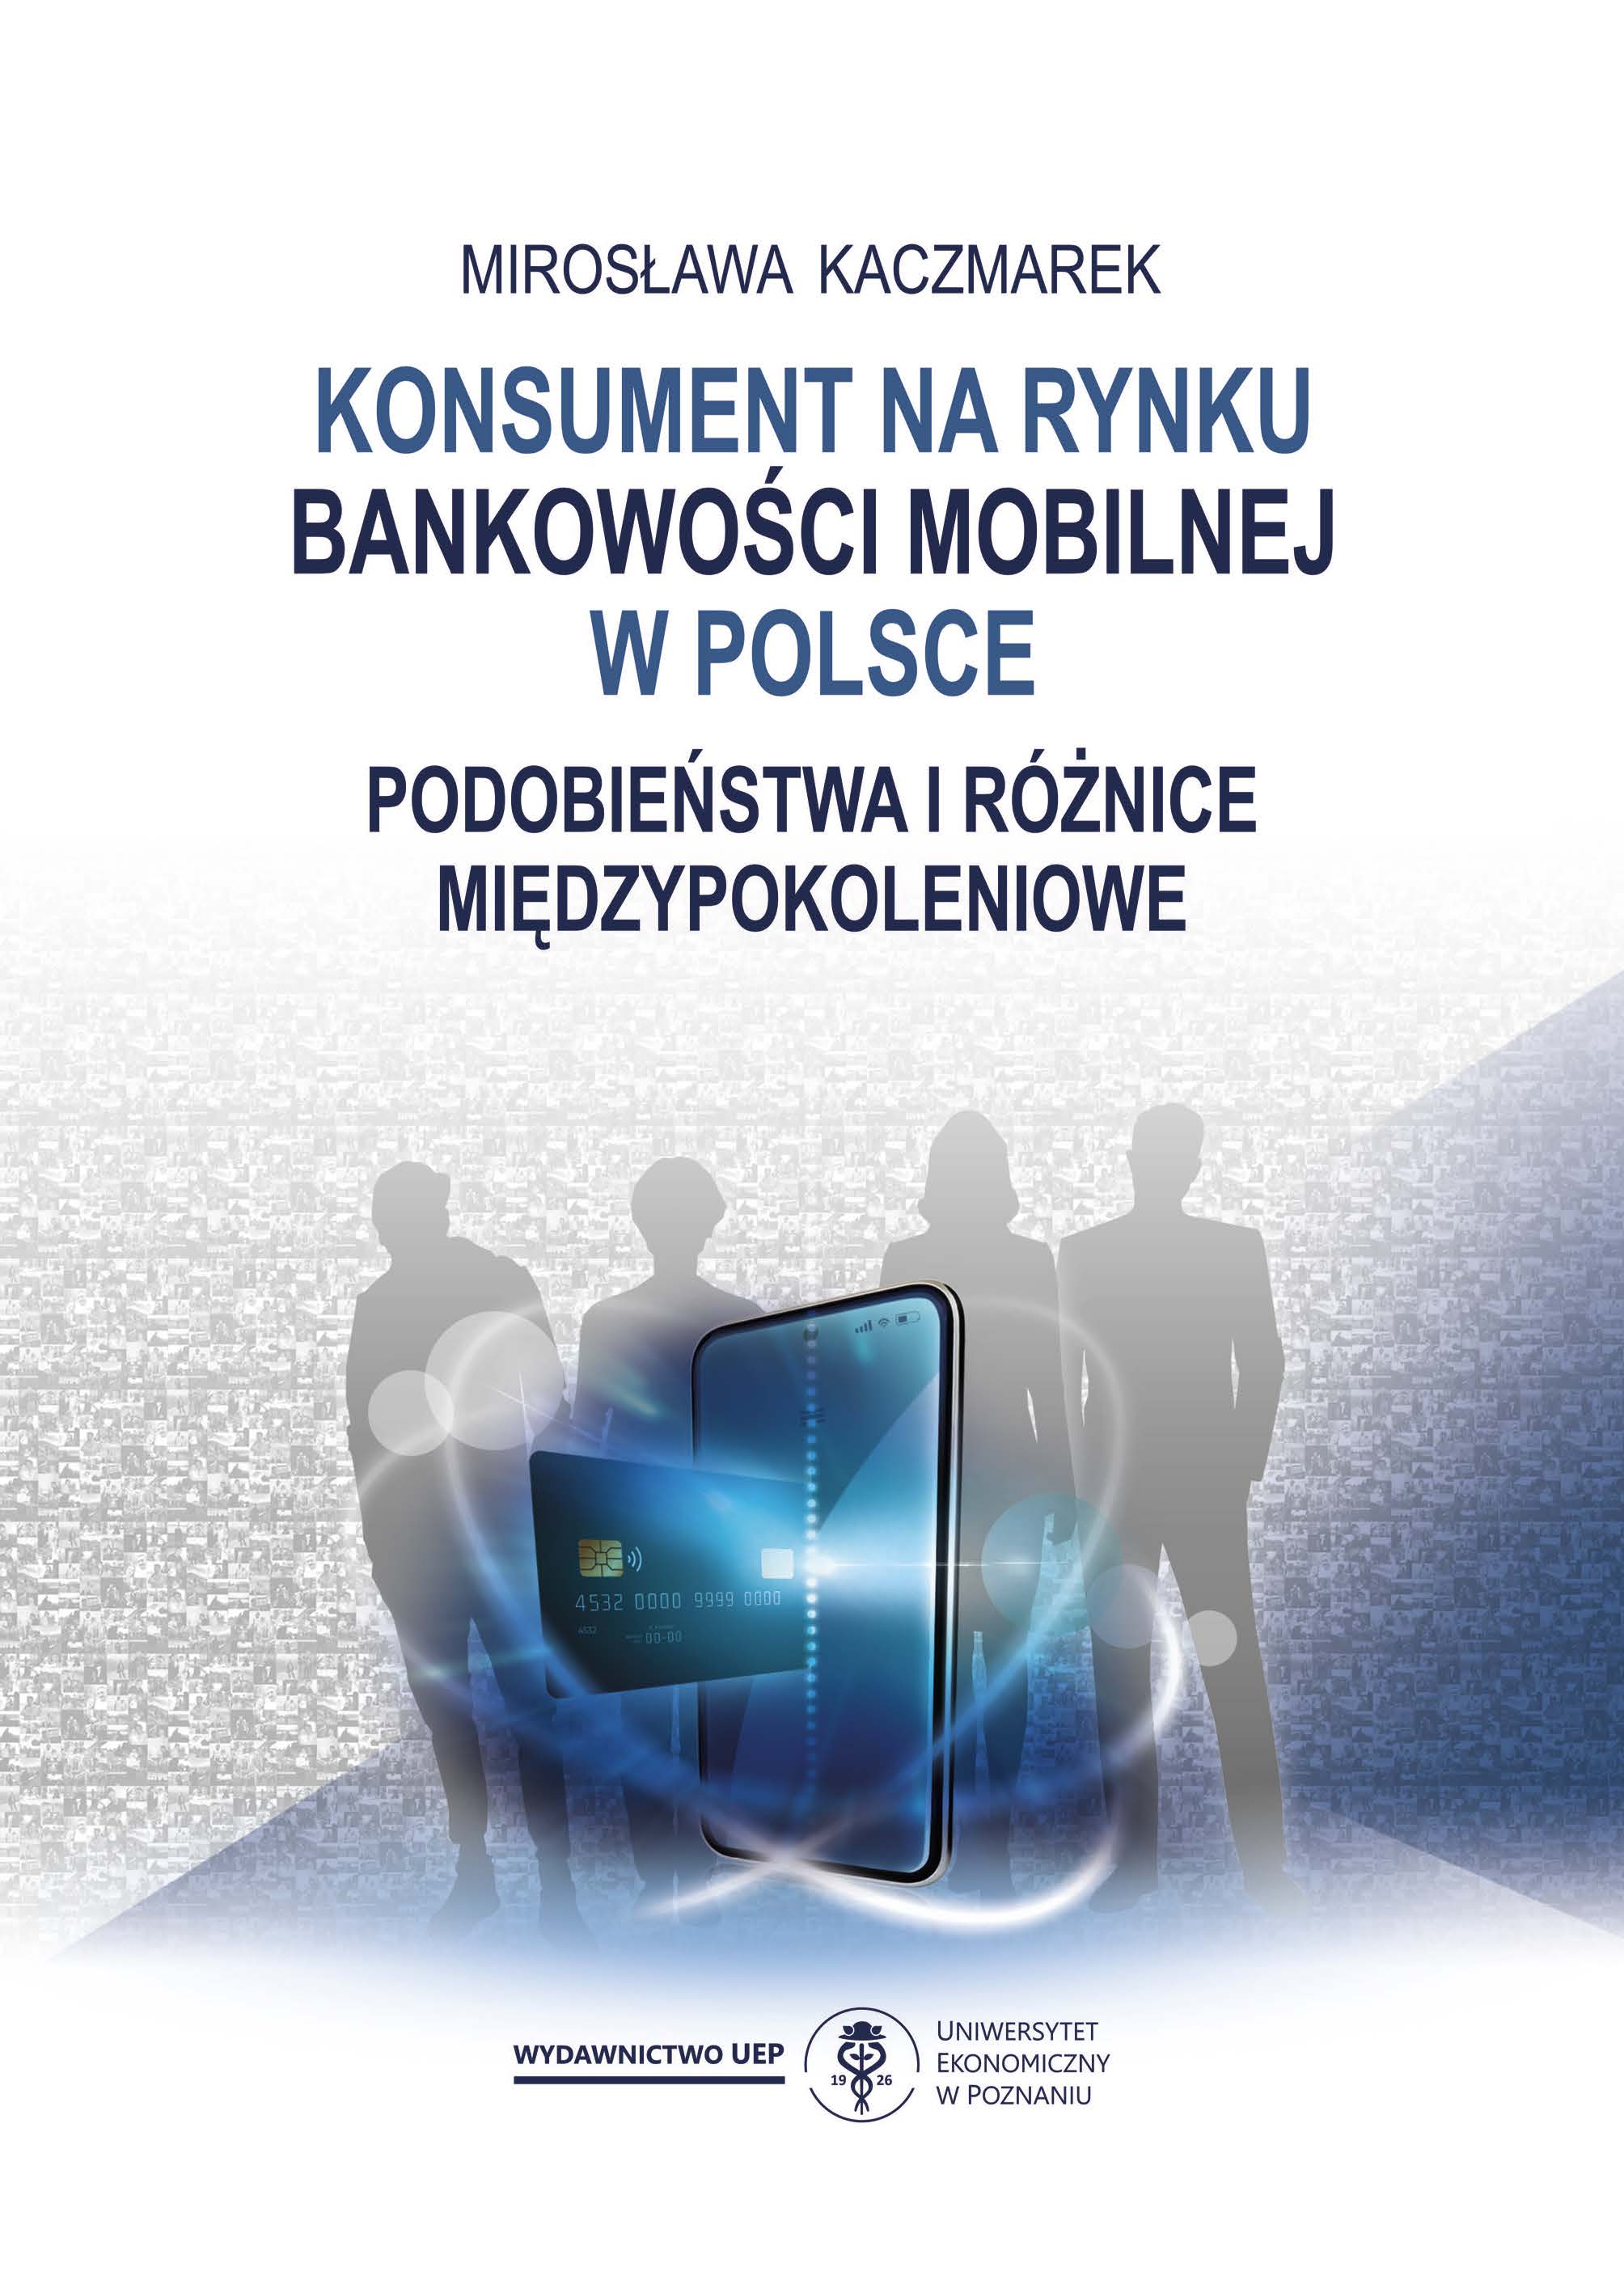 The consumer on the mobile banking market in Poland.
Intergenerational similarities and differences Cover Image